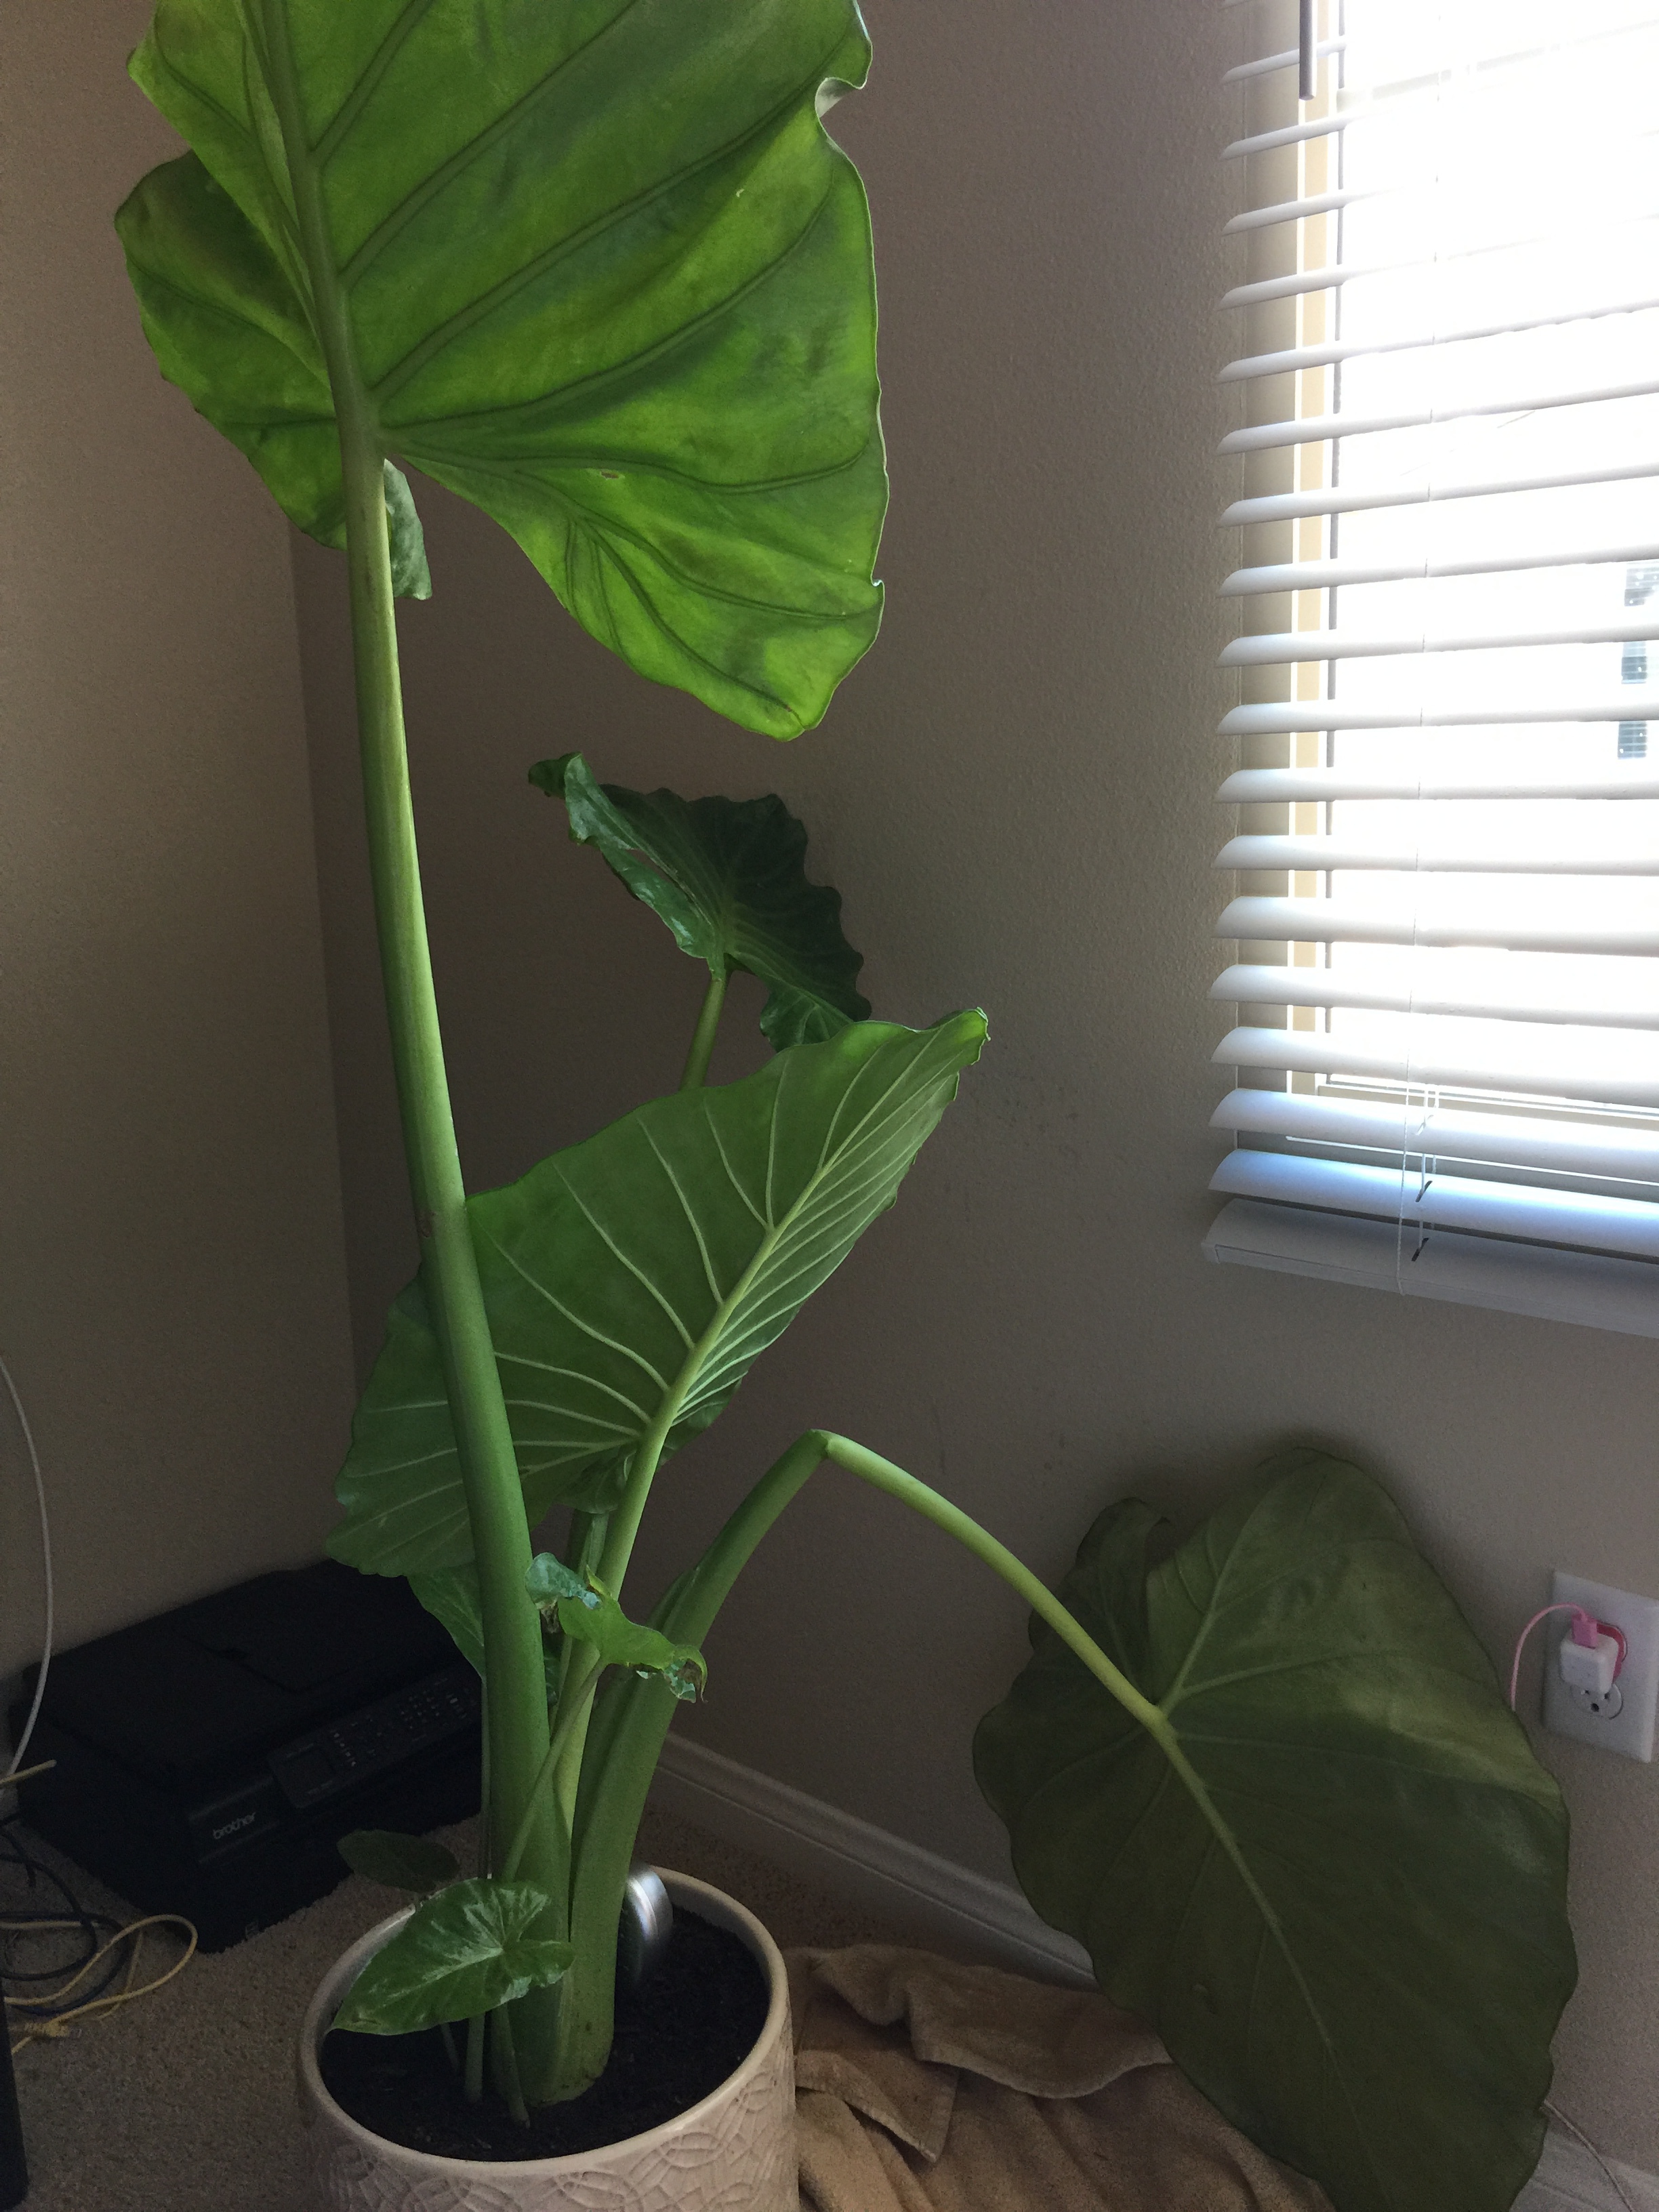 What is wrong with my elephant ear plant? #283045 - Ask Extension